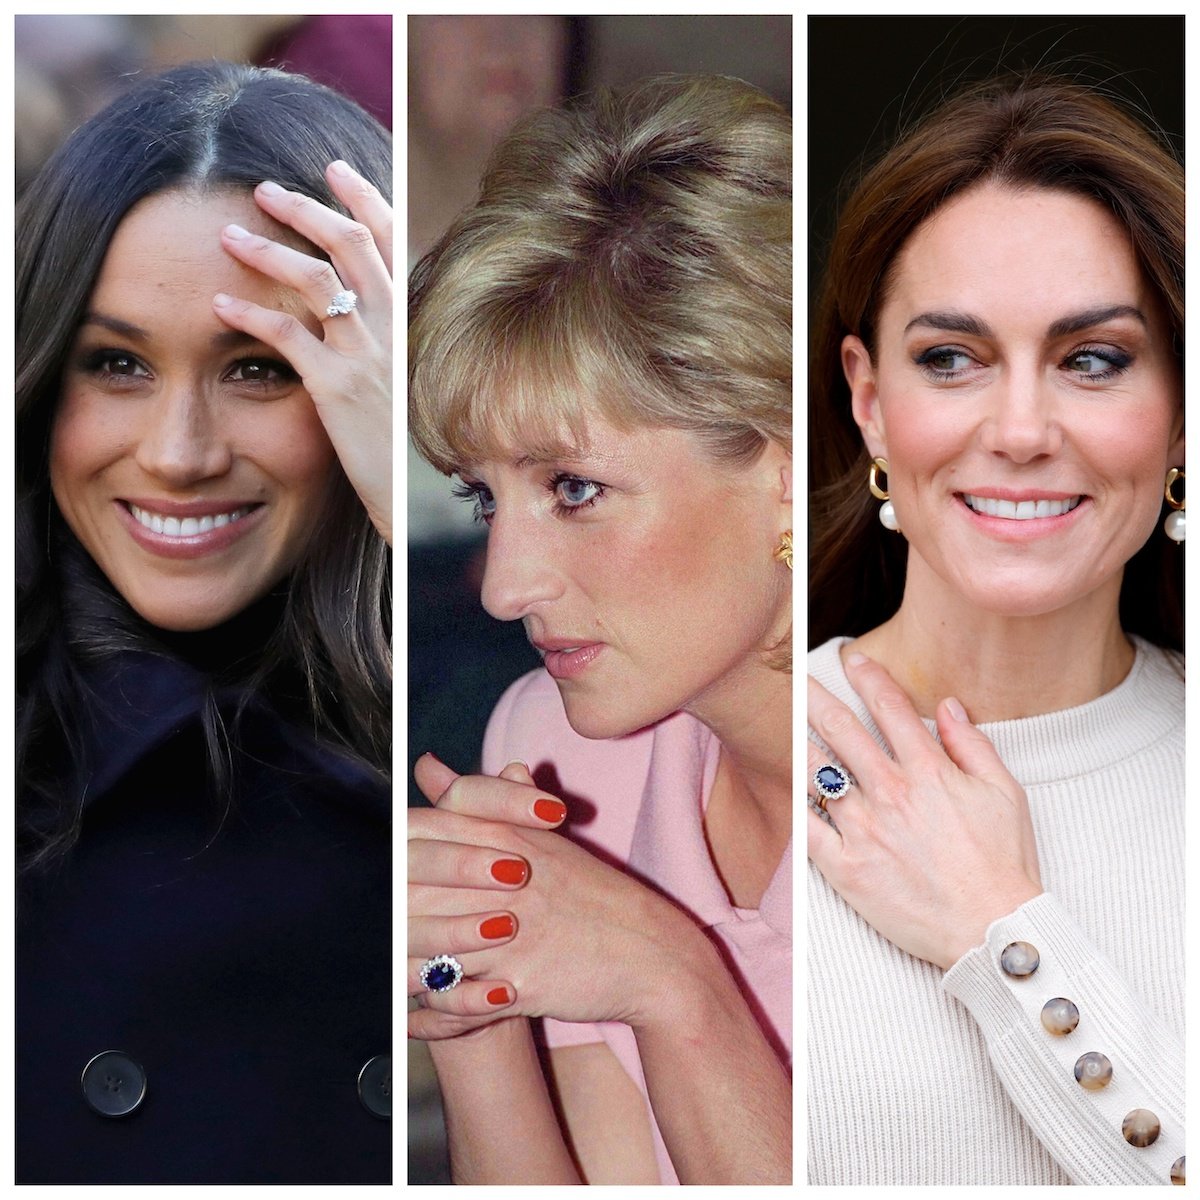 Meghan Markle, who, per a study, had most 'iconic' royal engagement ring of 2023, in a composite image alongside Princess Diana and Kate Middleton